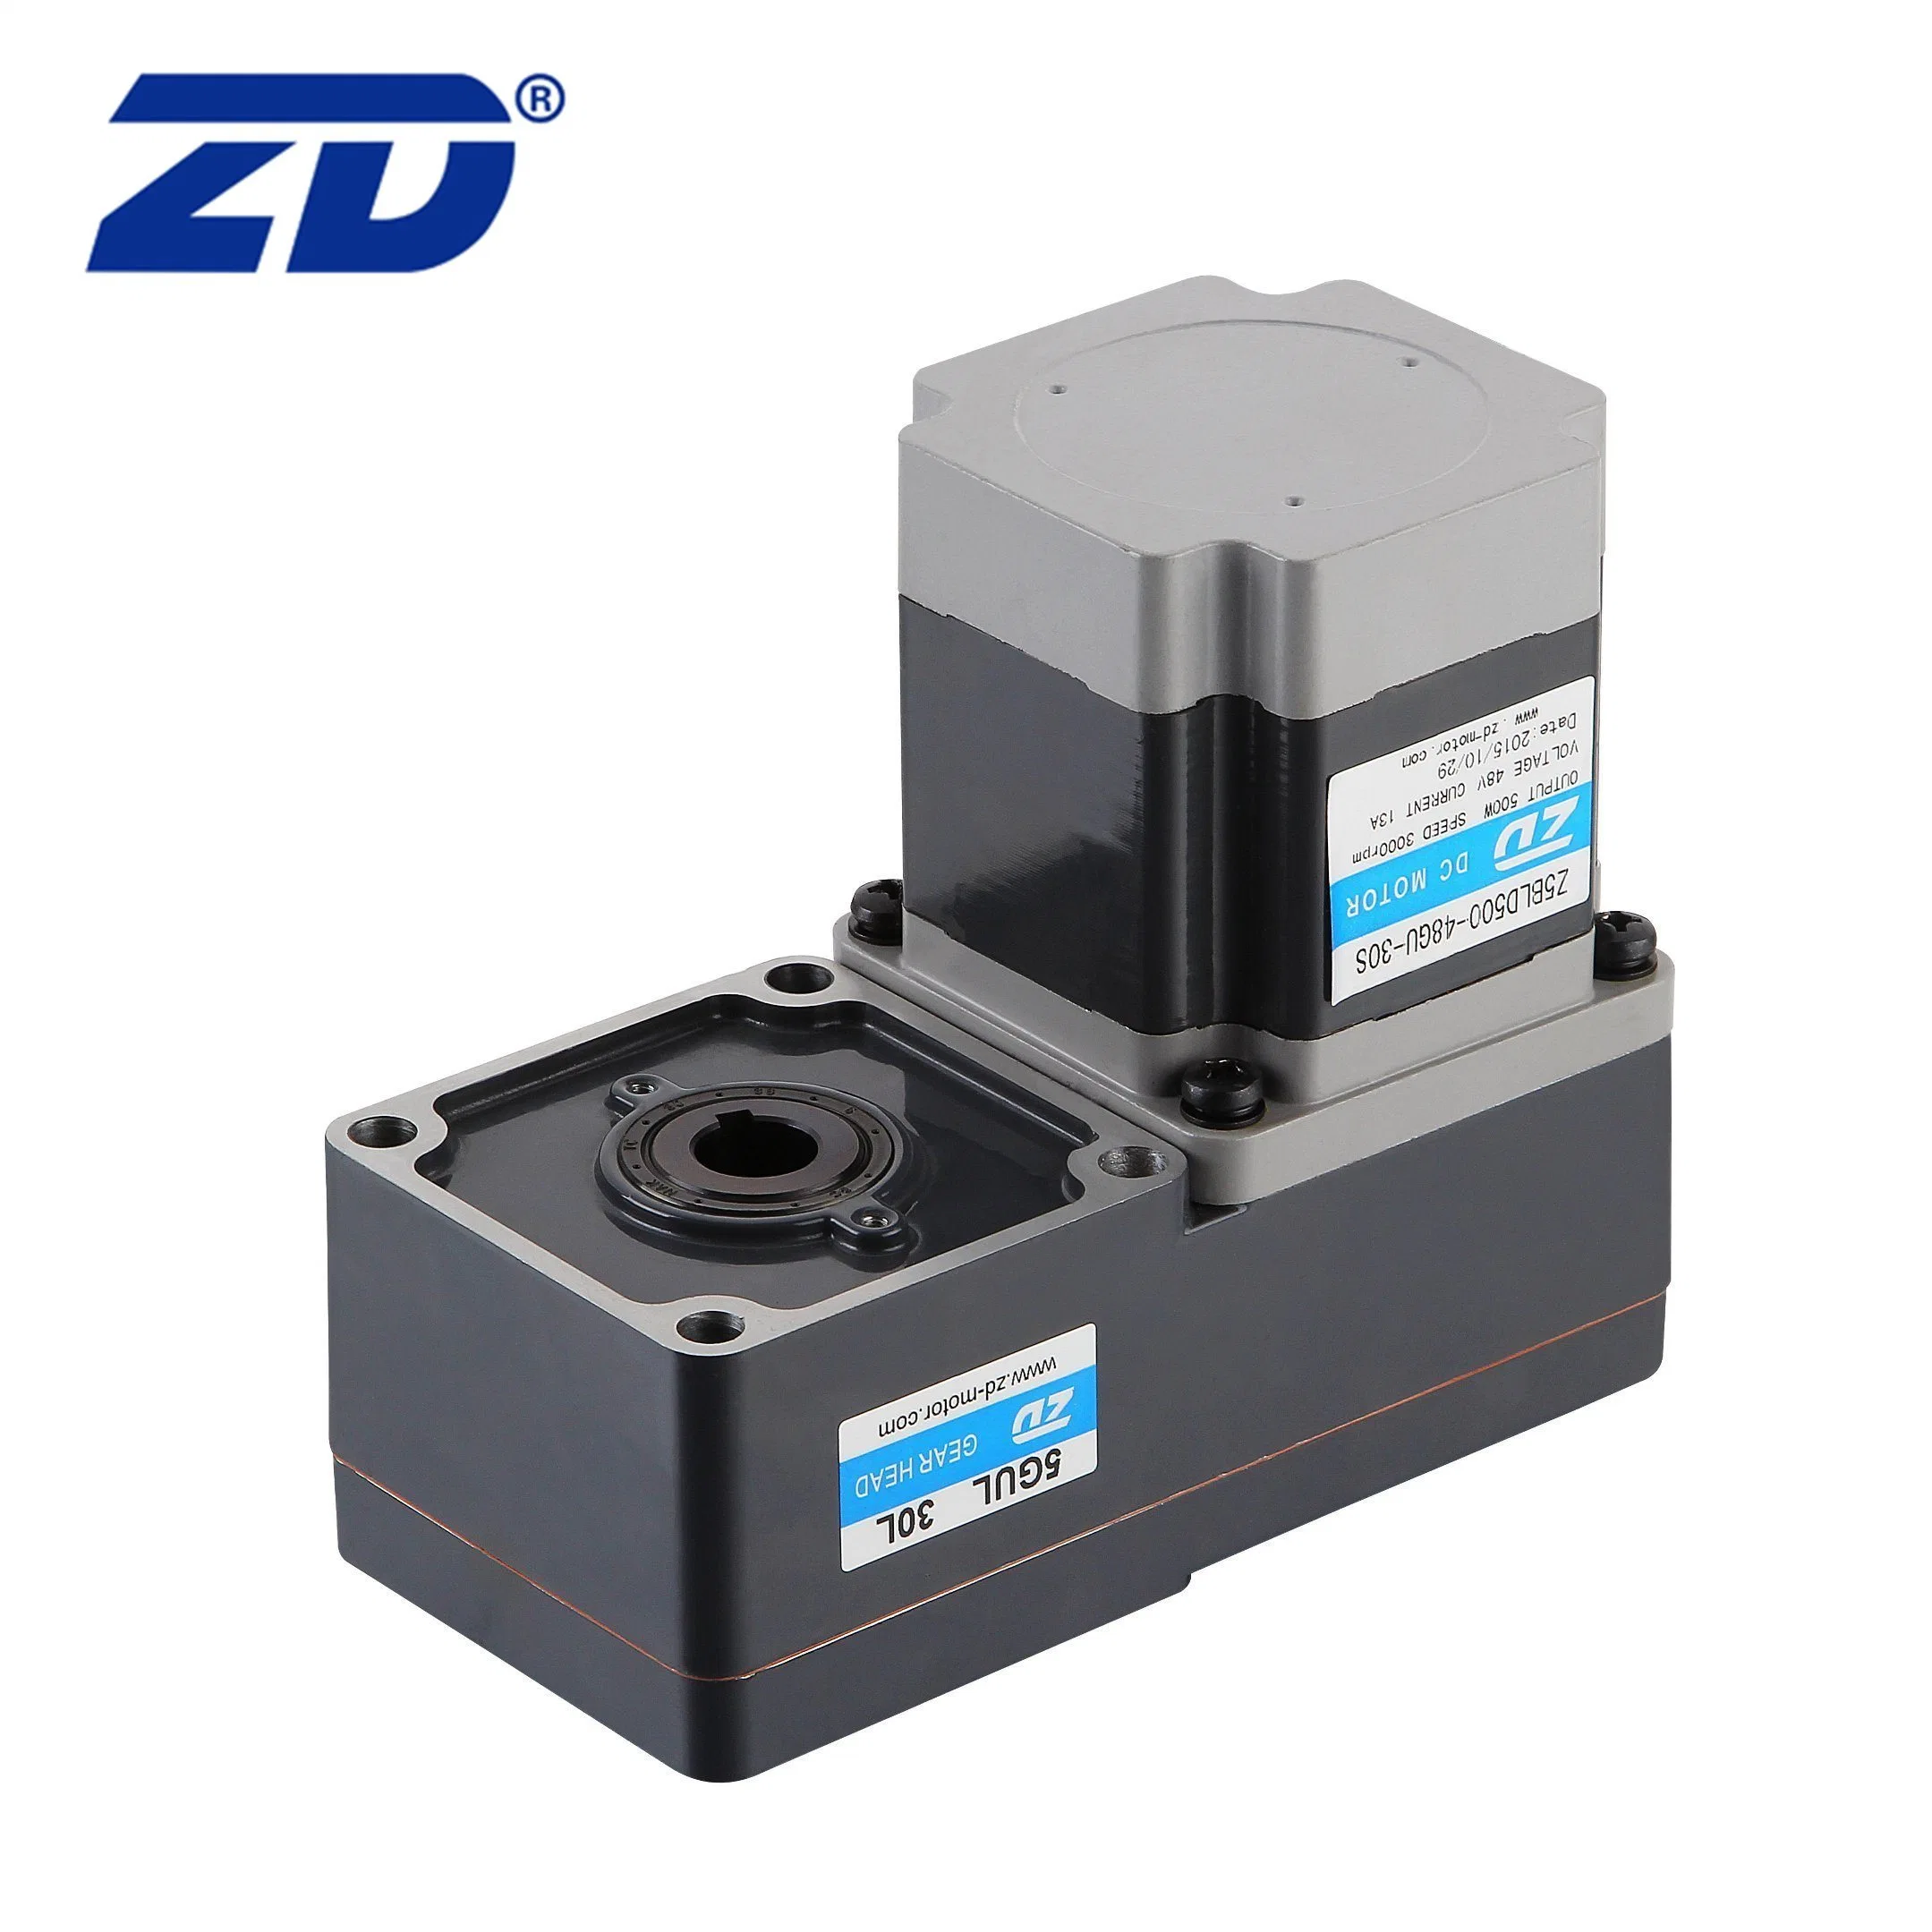 ZD China Closed Type High-Efficiency High Performance 15W-750W Brushless DC Gear Motor With Speed Controller